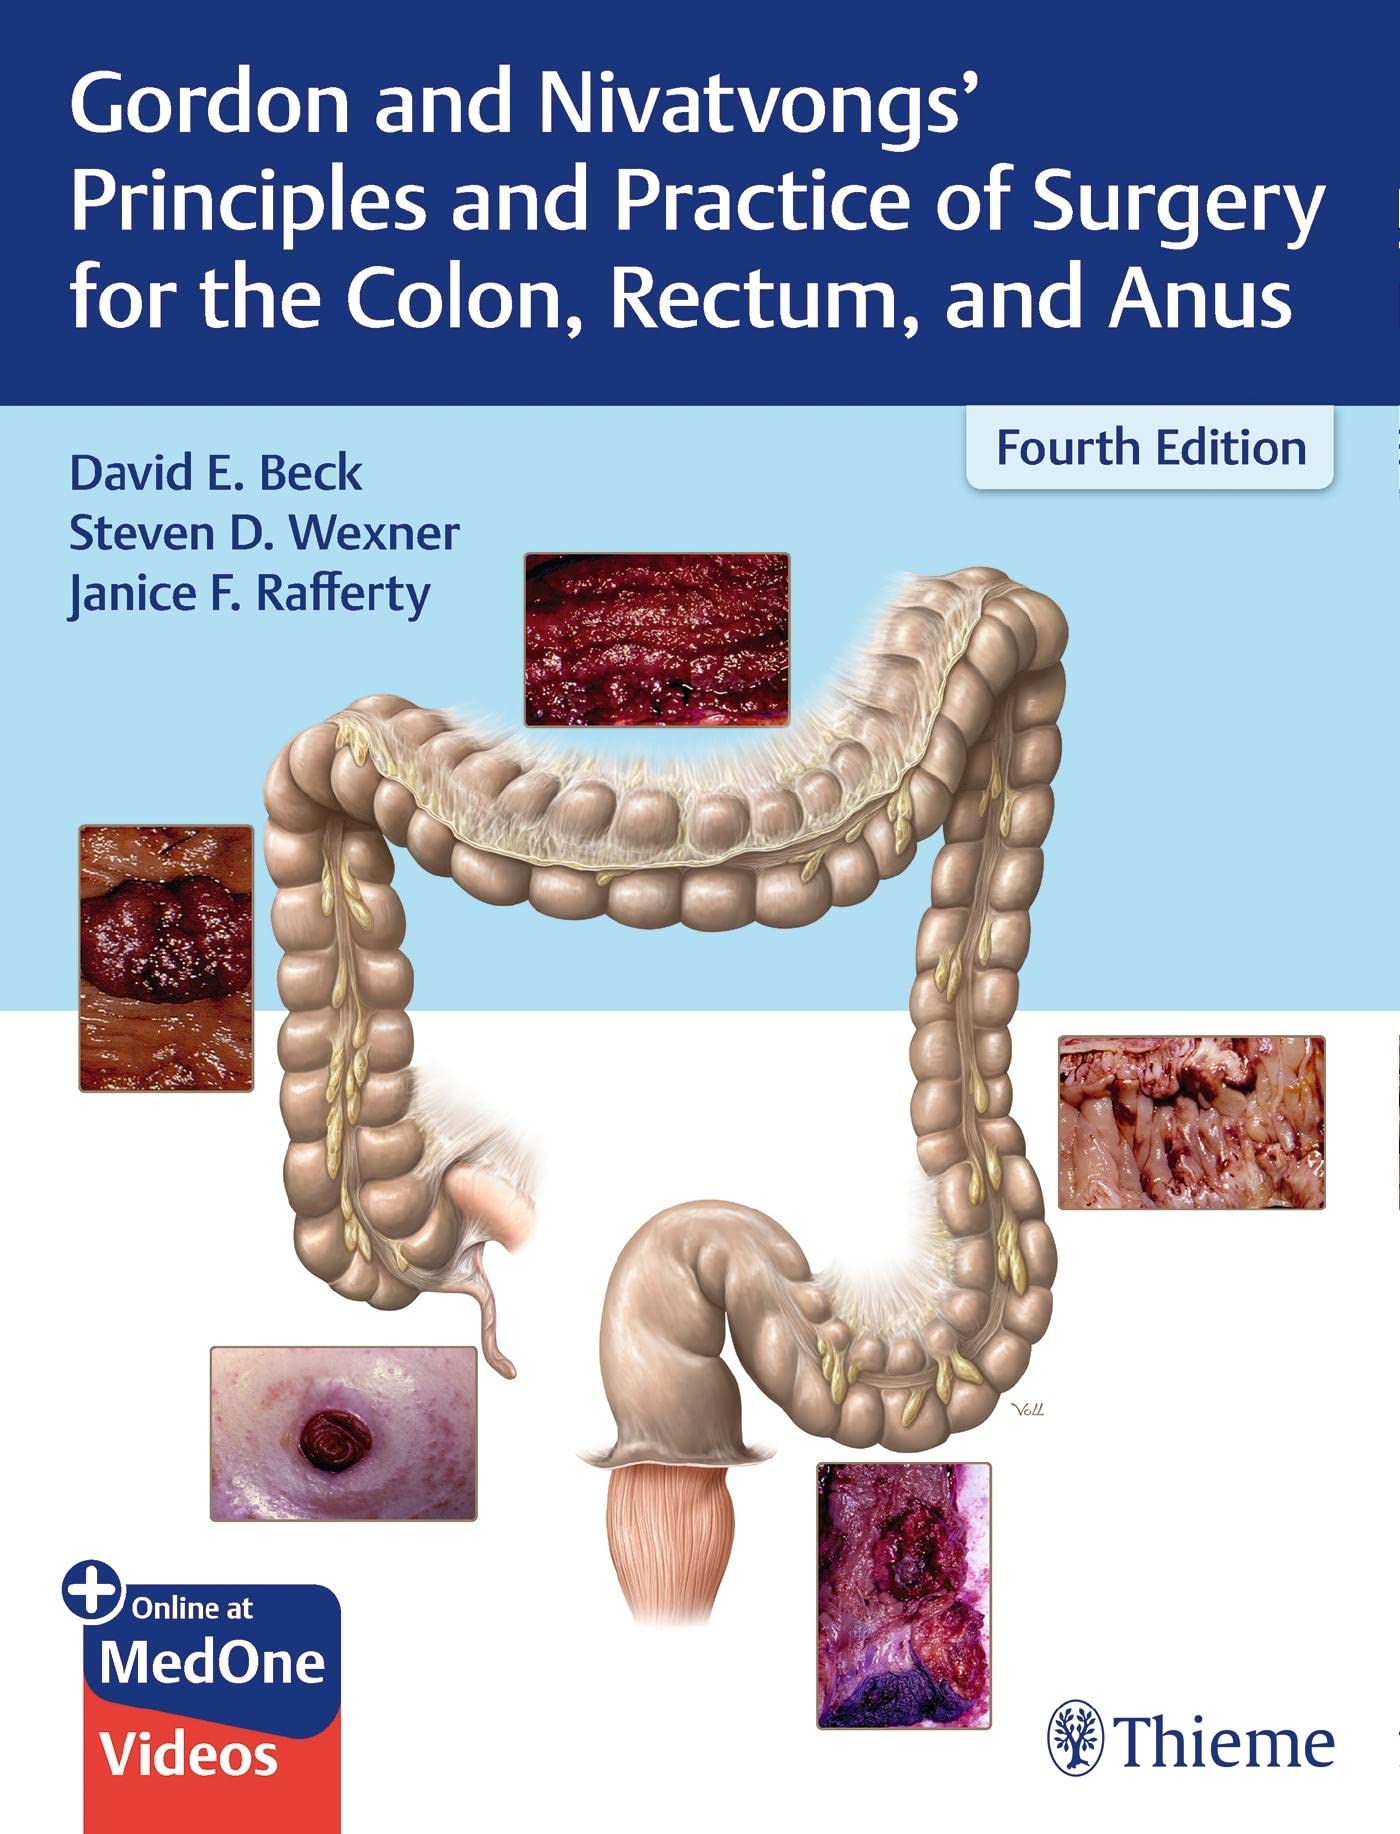 Gordon’s principles and practice of surgery for colon, rectum and anus